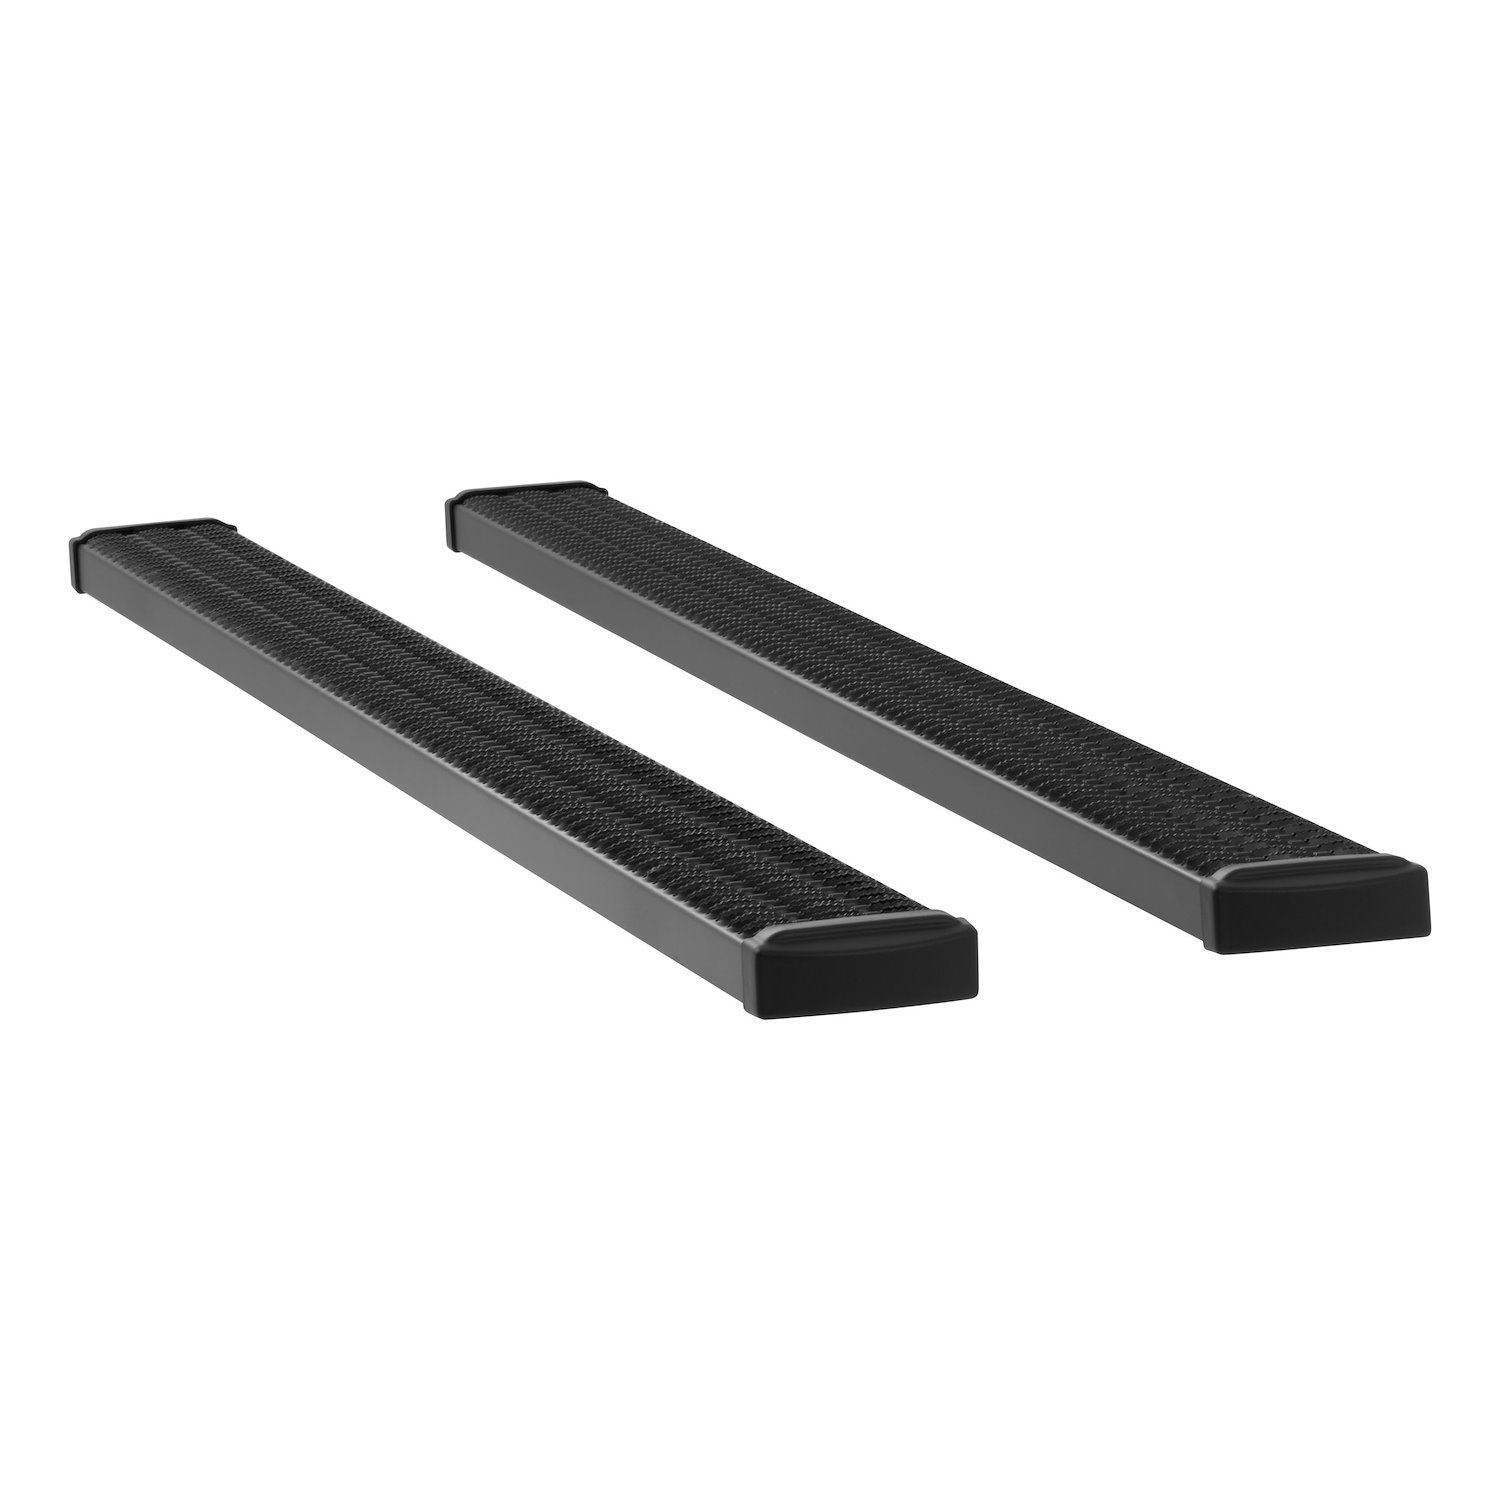 415098-400940 Grip Step 7 in. x 98 in. Aluminum Wheel-to-Wheel Running Boards Fits Select Ram 1500